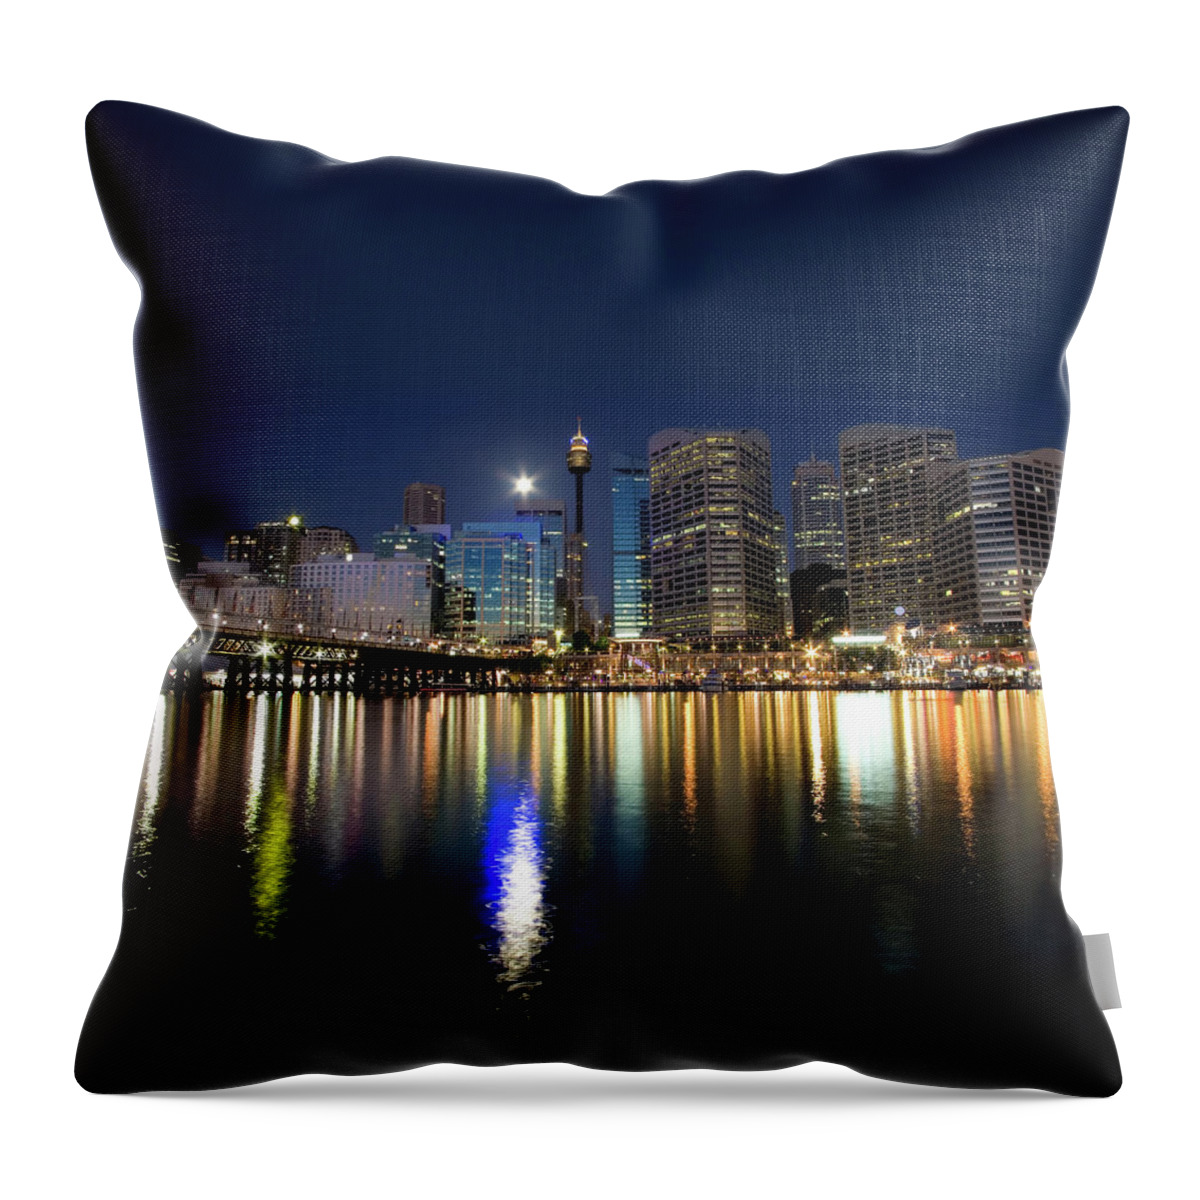 Scenics Throw Pillow featuring the photograph Sydney Darling Harbour Twilight by Matejay